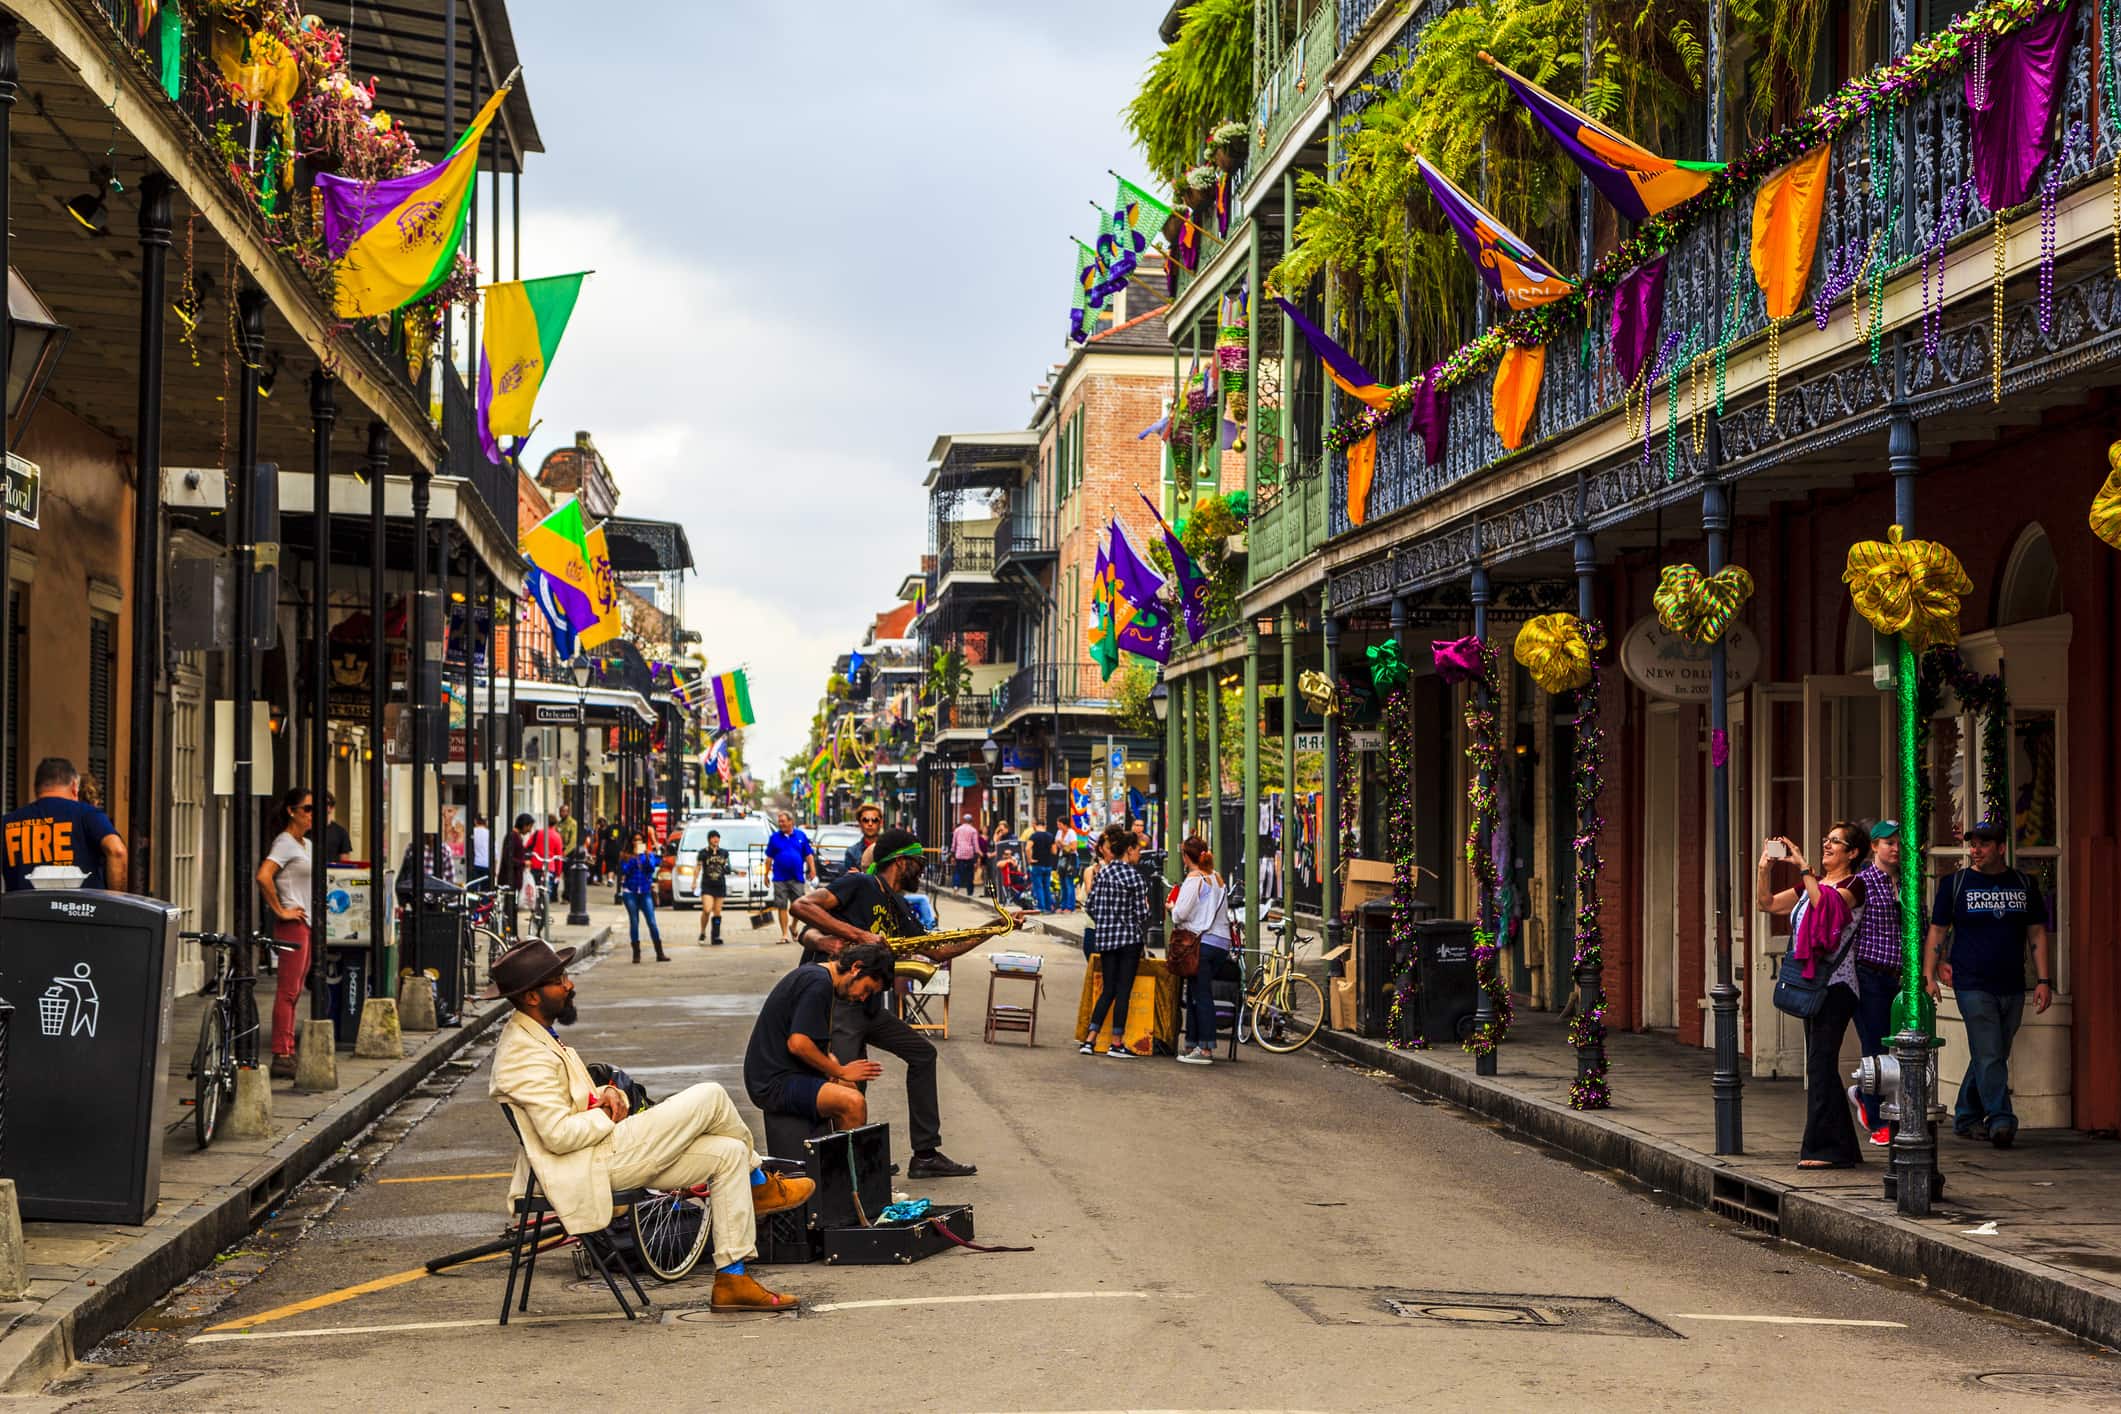 New Orleans Festival with Green, Orange, and Purple flags